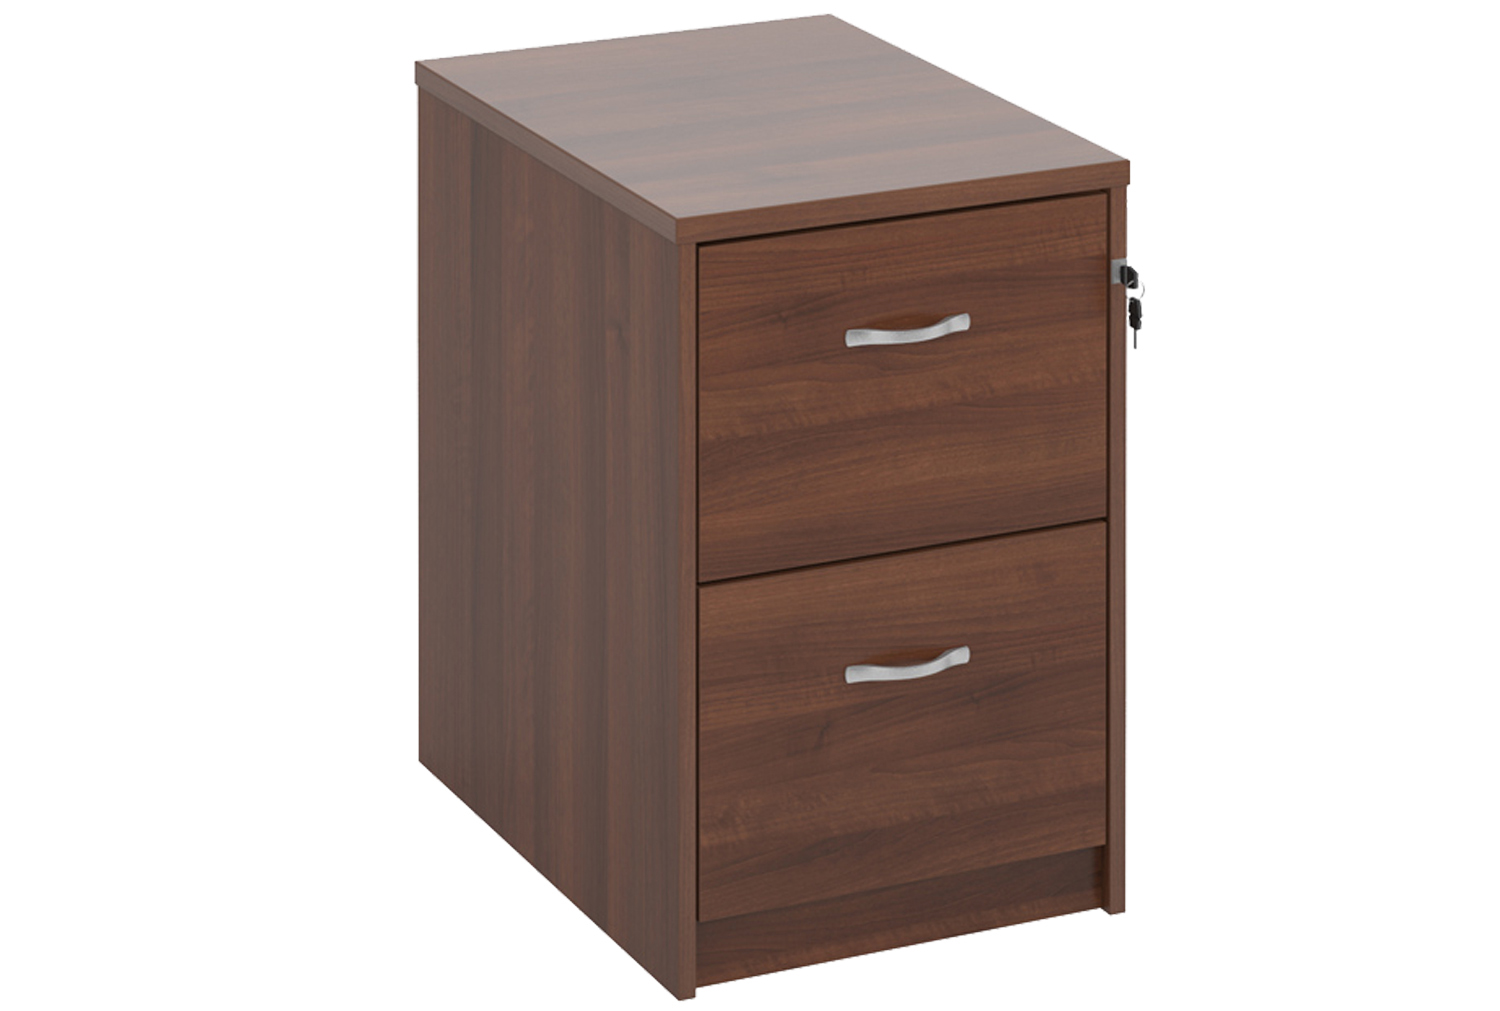 Tully Filing Cabinets, 2 Drawer - 48wx66dx73h (cm), Walnut